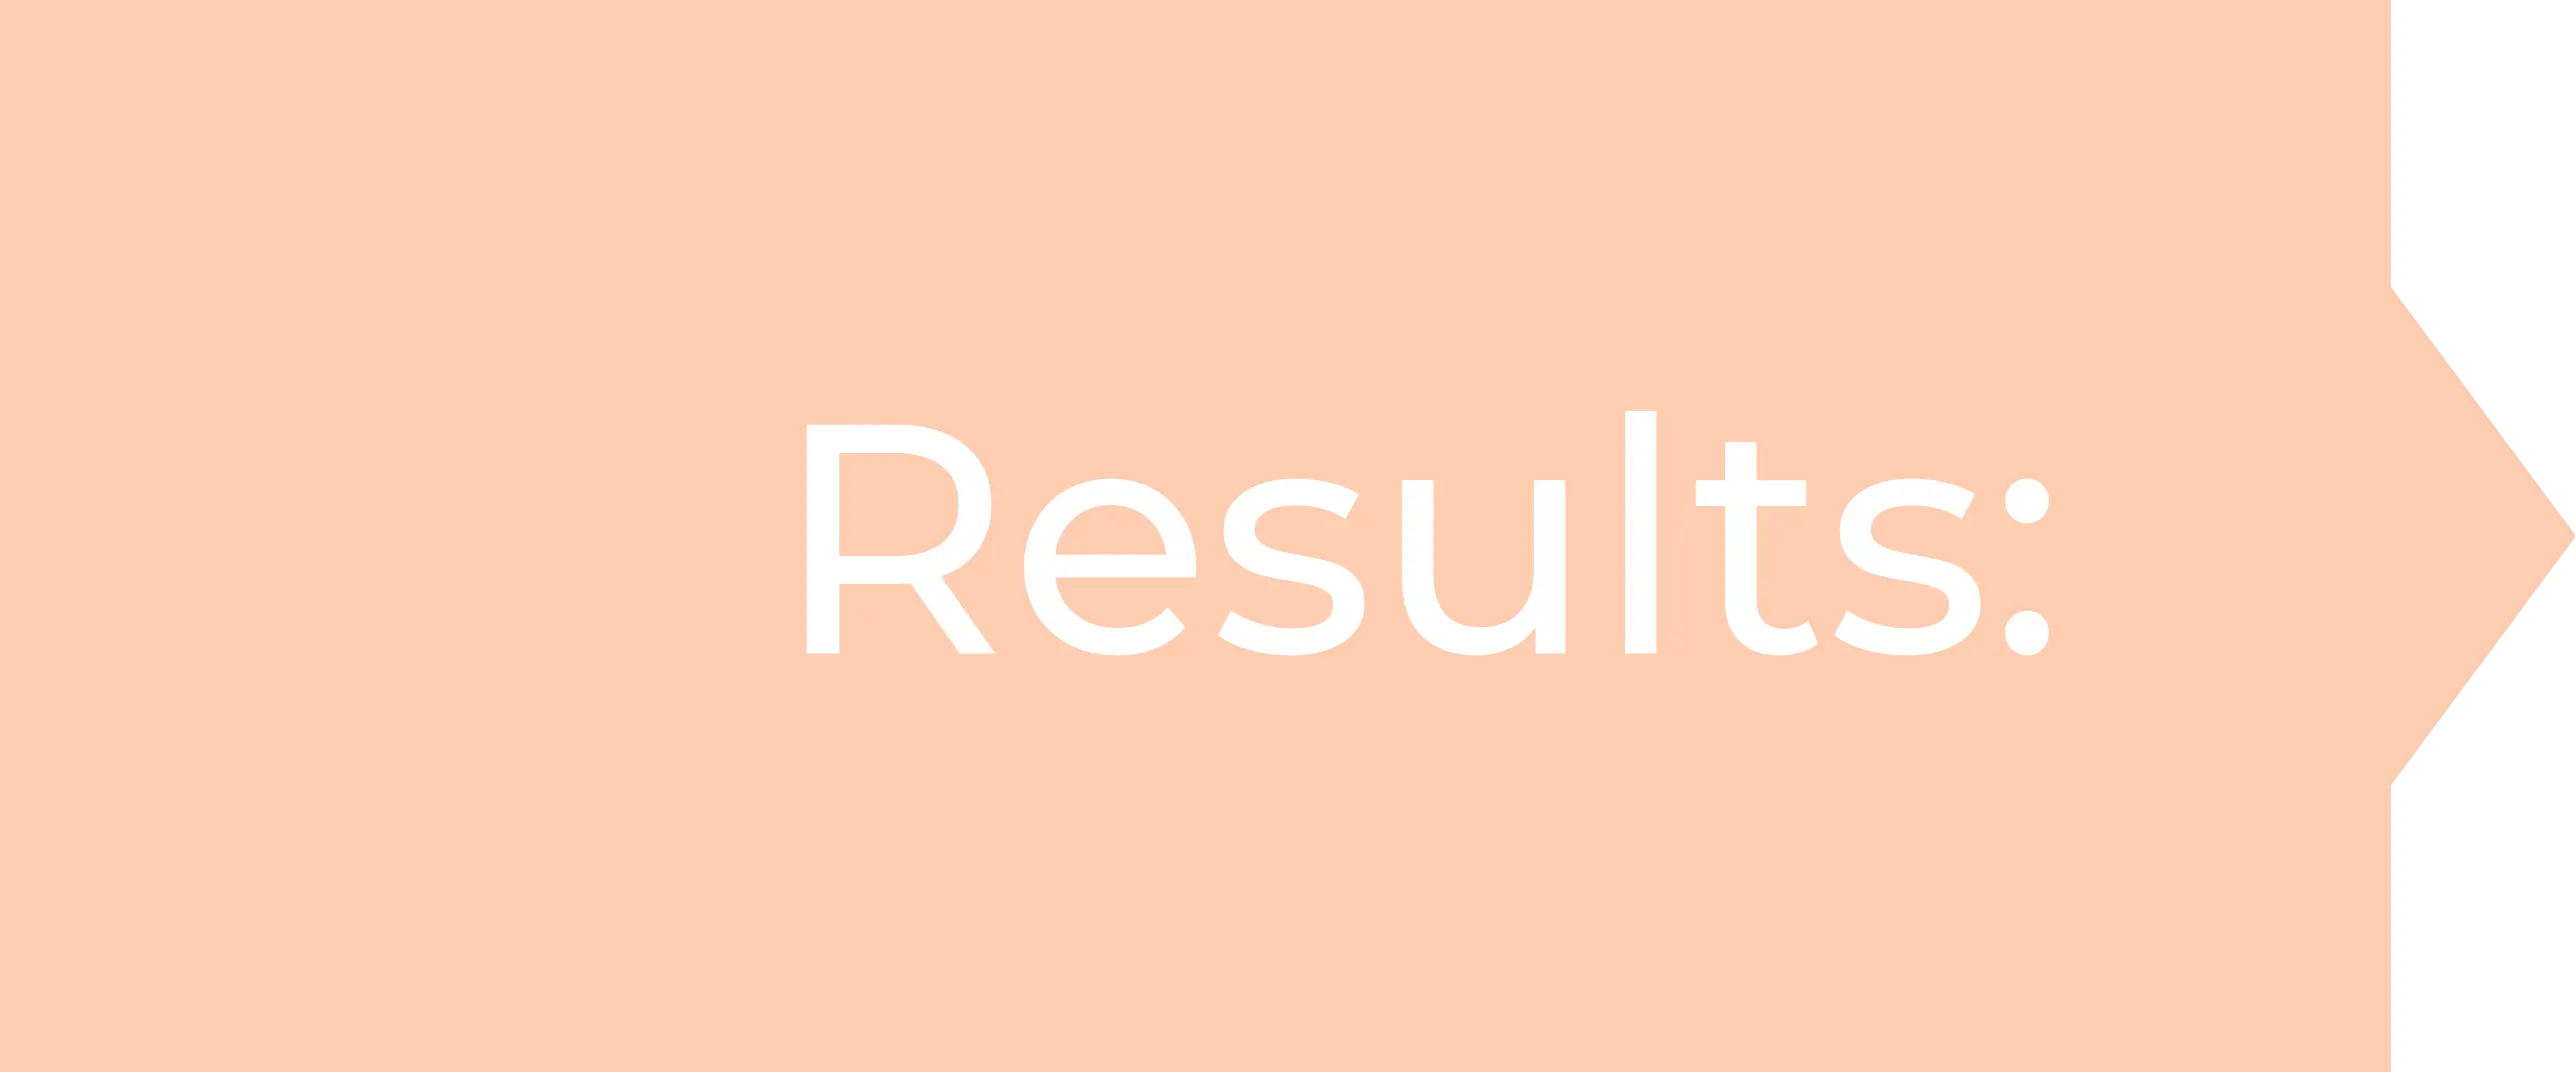 Results: